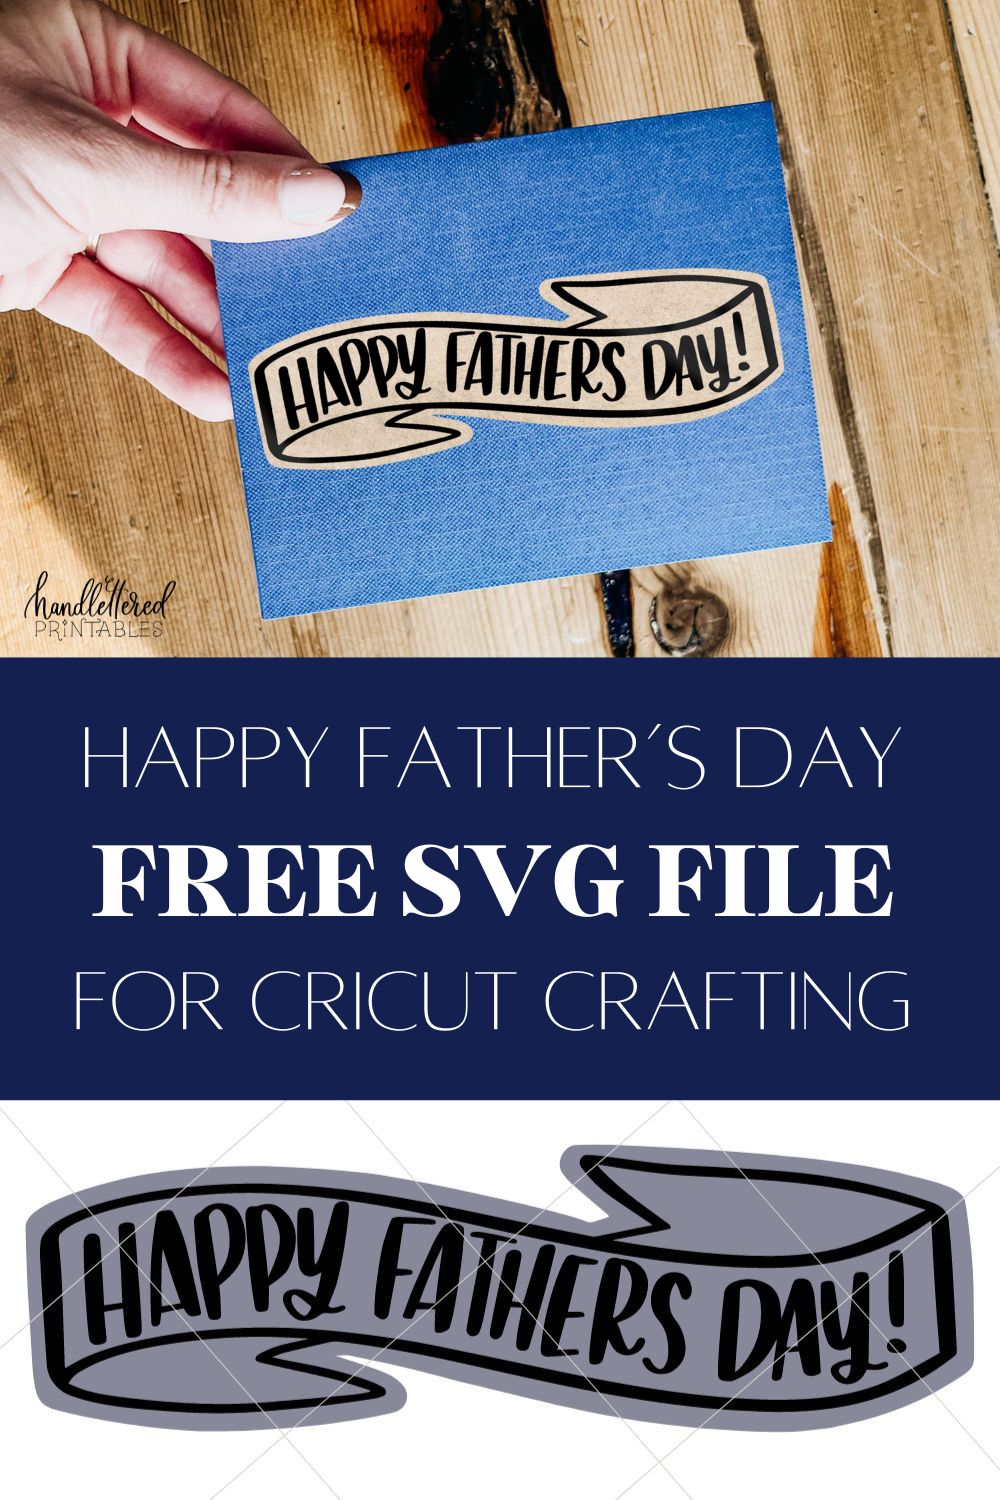 top image: happy fathers day card with layered cardstock happy father's day banner on the front made from free happy fathers day svg cut file with hand lettered details bottom image of the cut file on white background text title reads: happy father's day free SVG file for cricut crafting